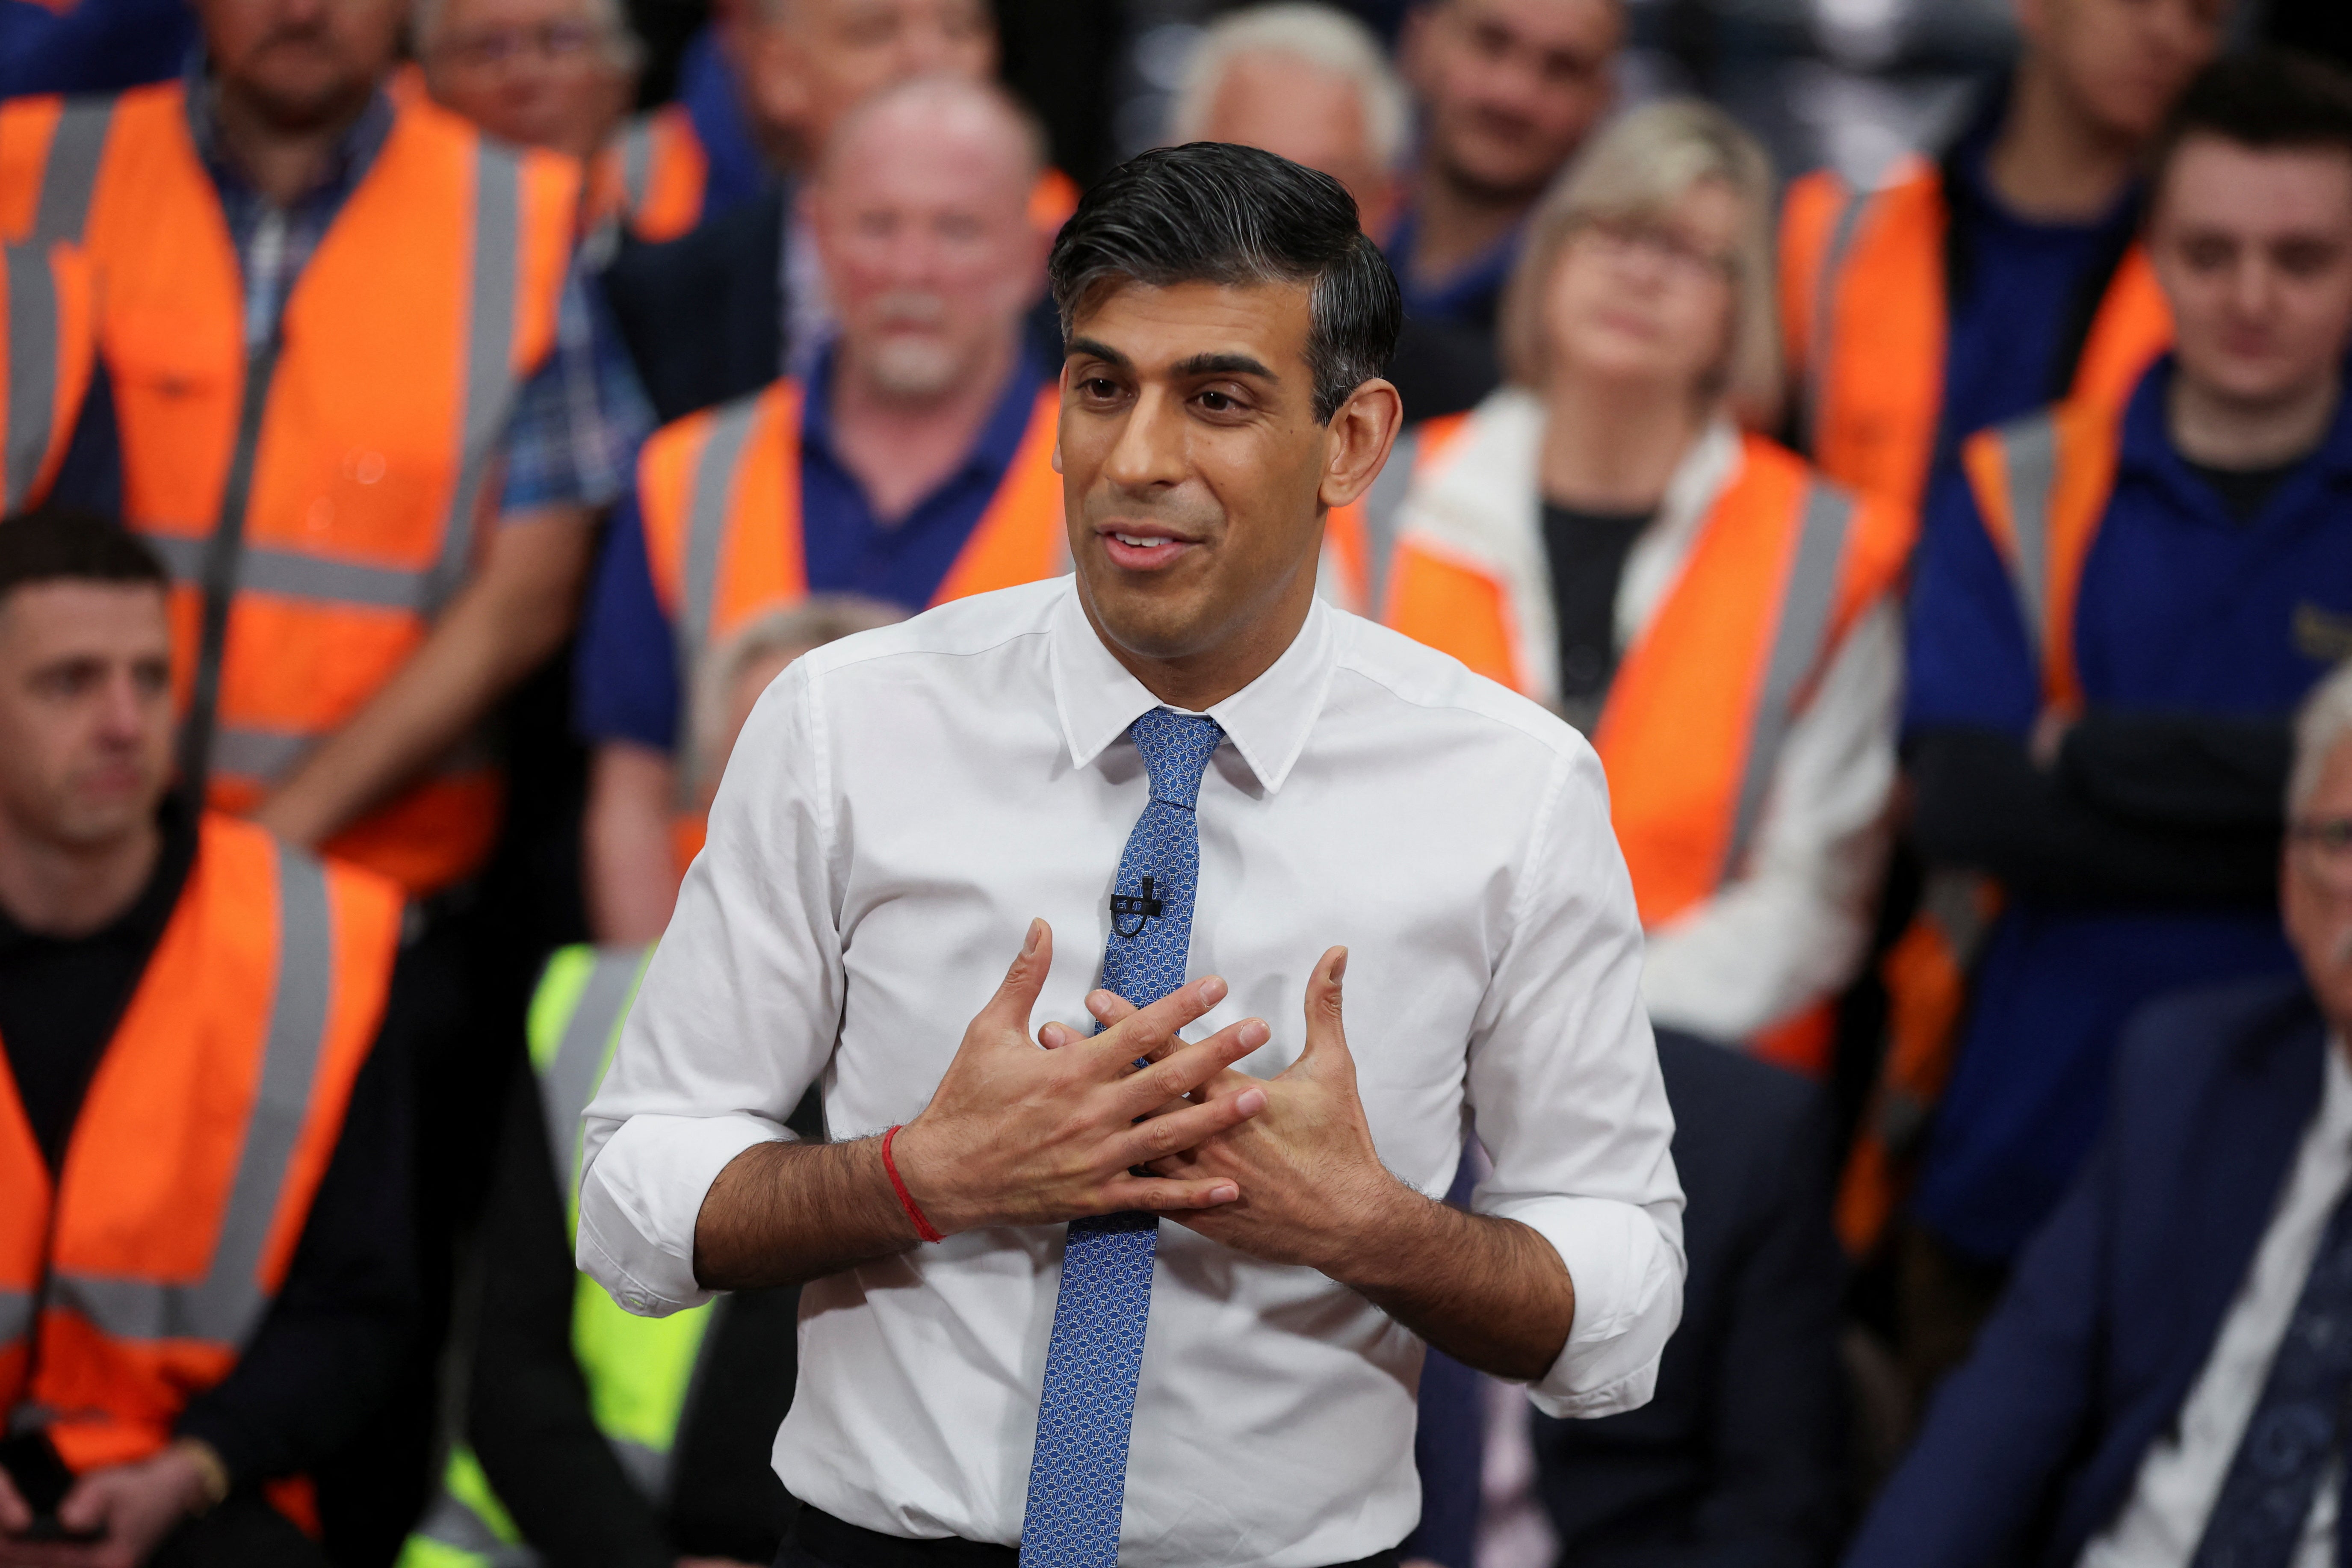 Rishi Sunak has pledged to bring down net migration to the UK